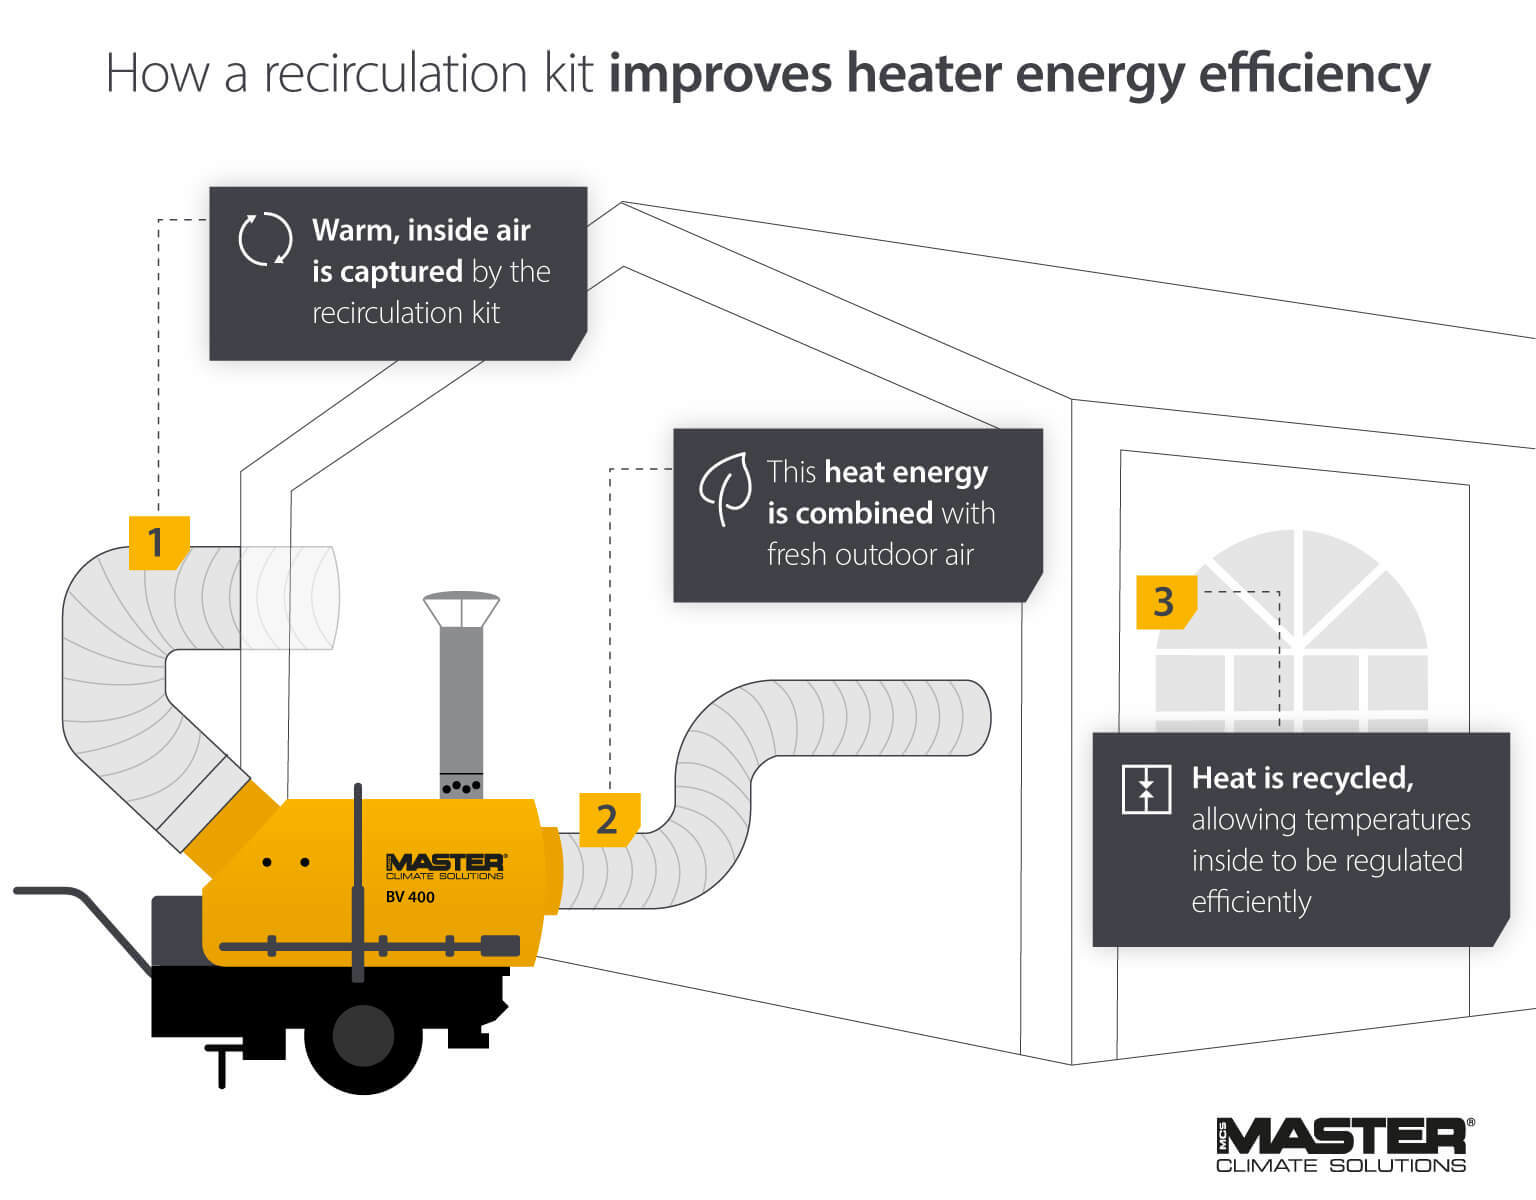 Using a recirculation kit to improve heater energy efficiency - Master infographic image